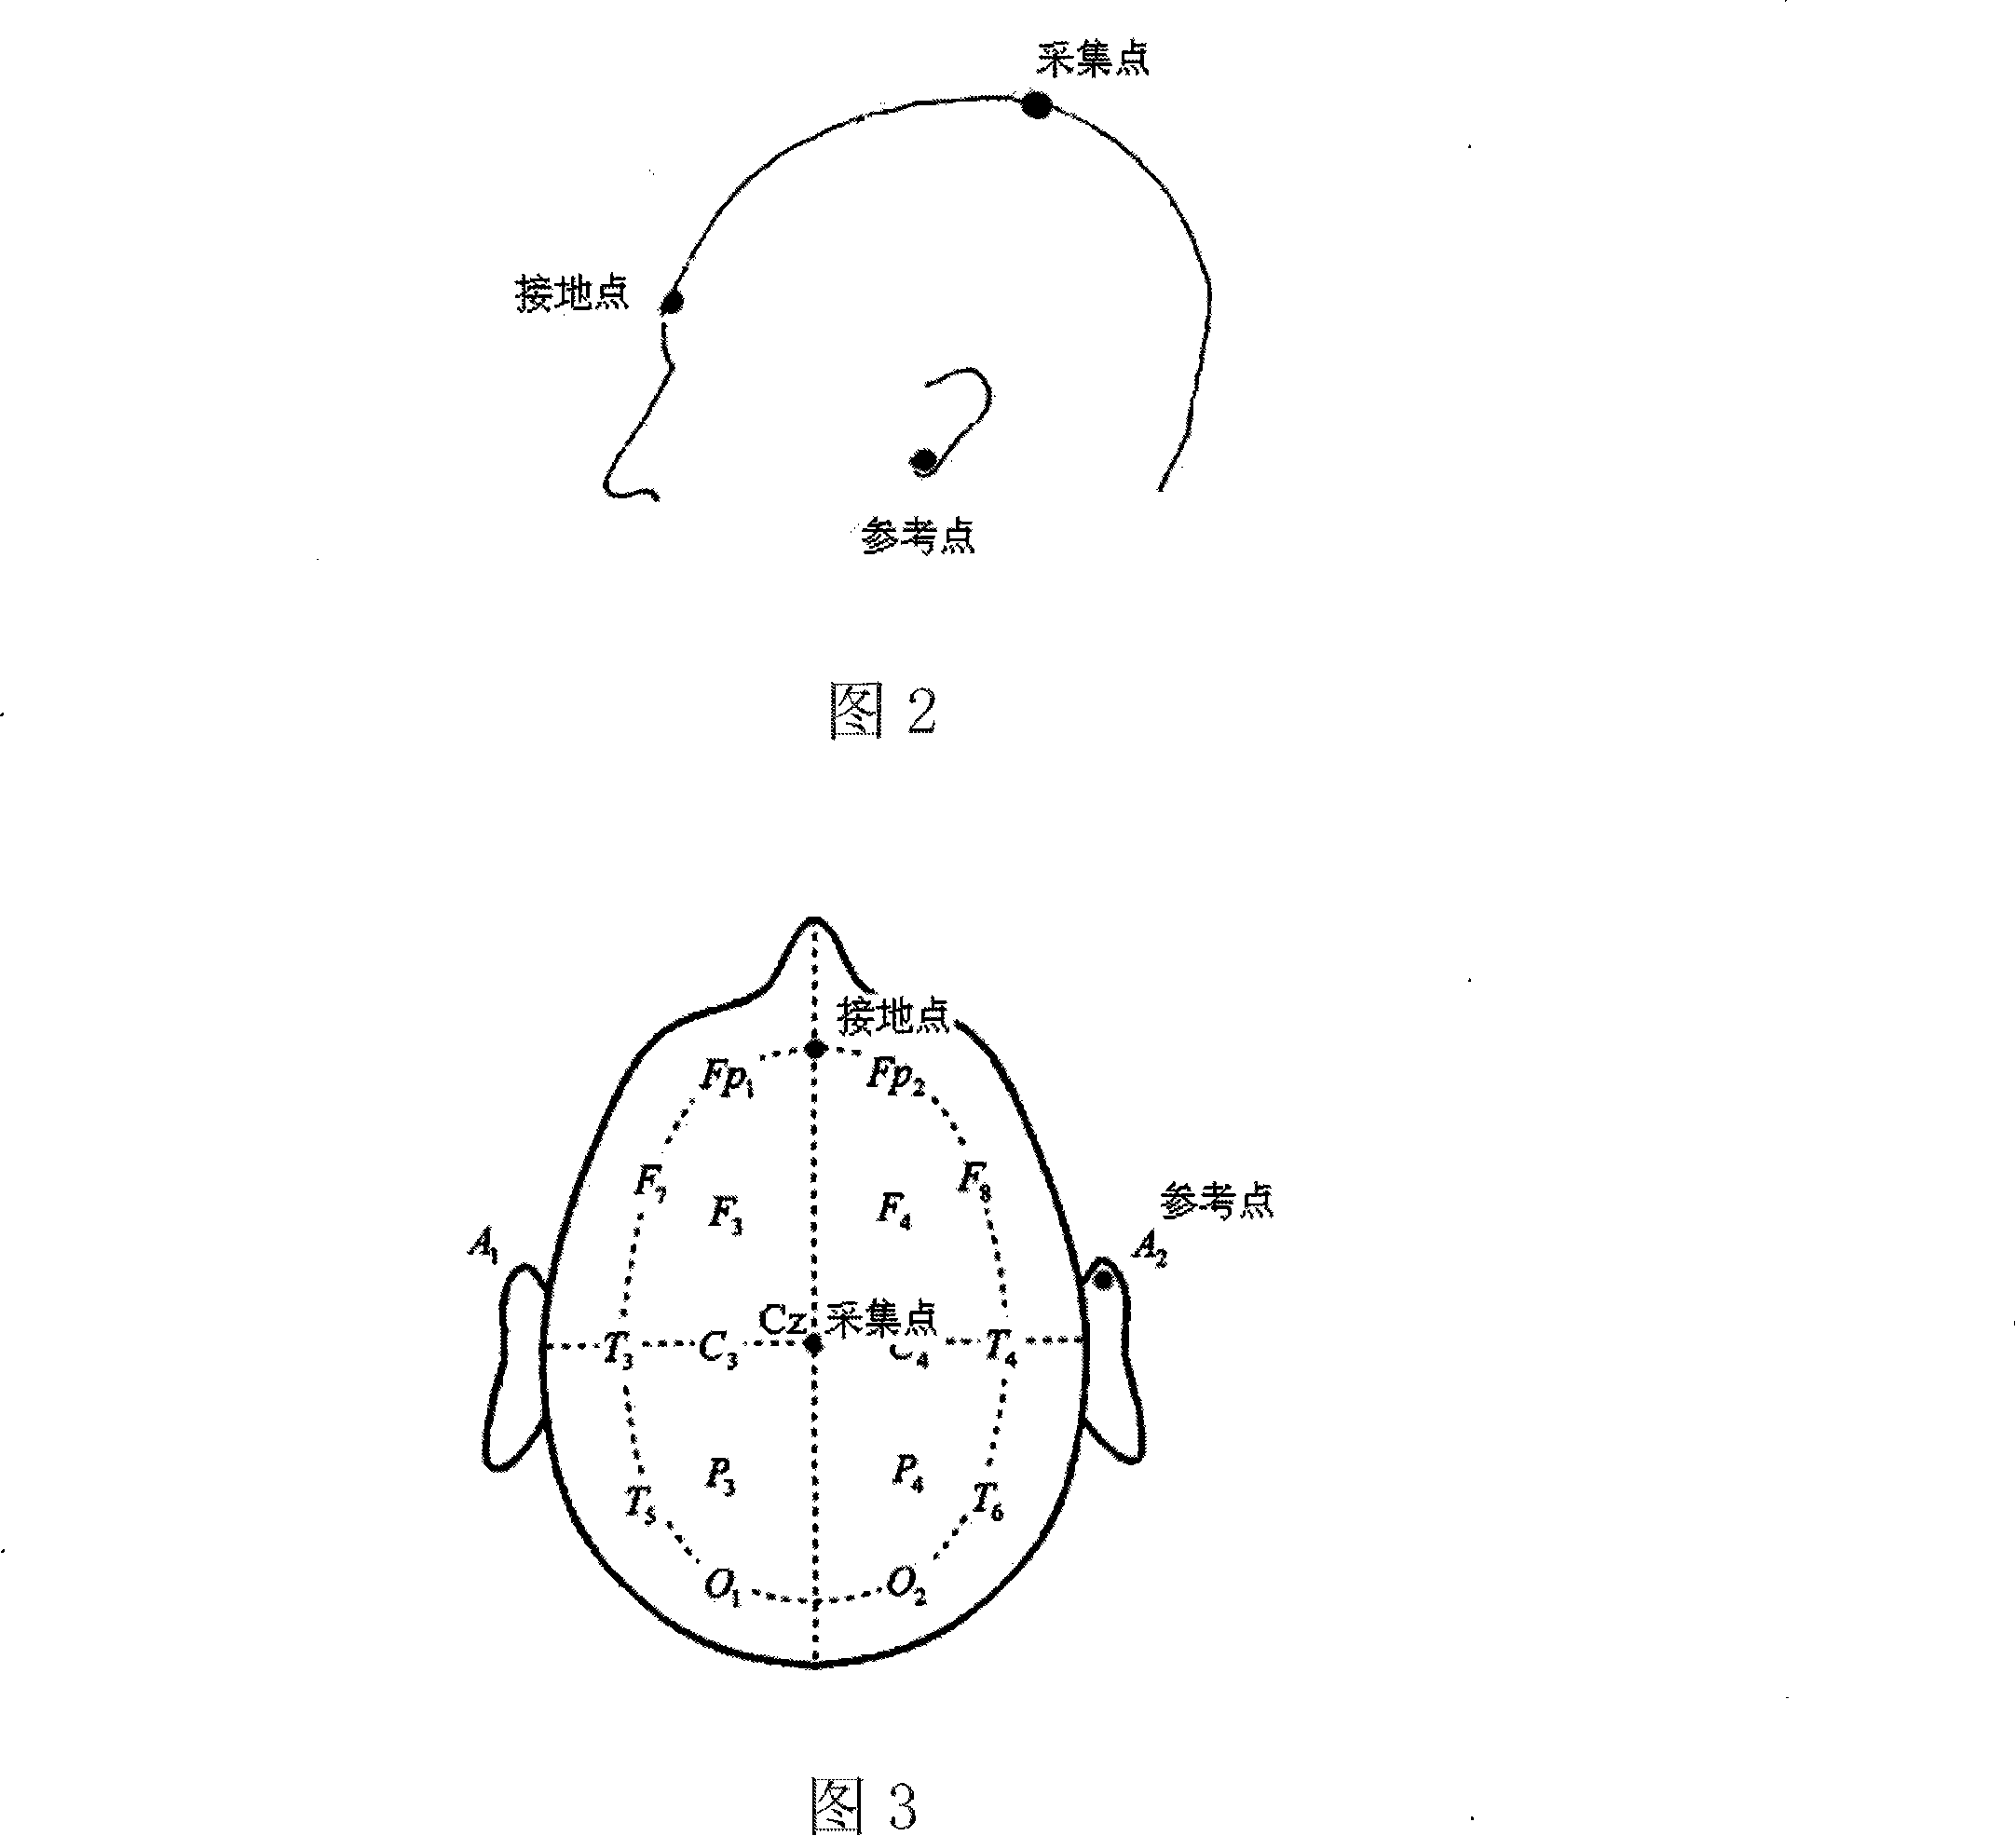 Method and apparatus for monitoring and awakening fatigue doze